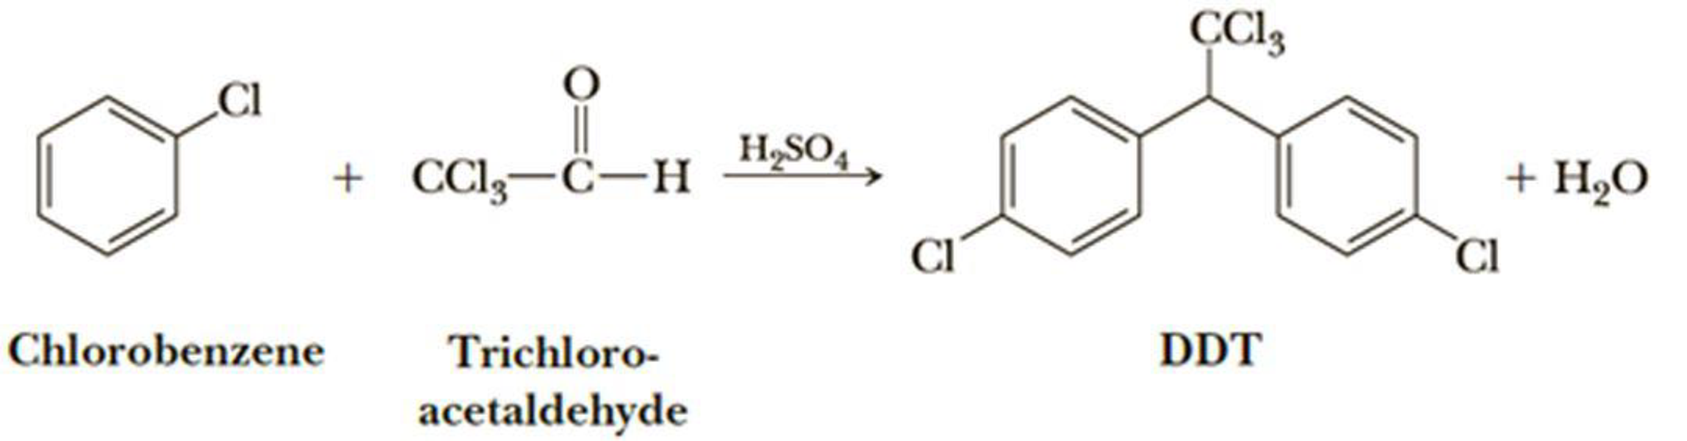 SOLVED: Please provide the structure of the alkyl halide known as DDT and  provide its name (IUPAC). Also address why it was banned from use in the  USA as a pesticide: If